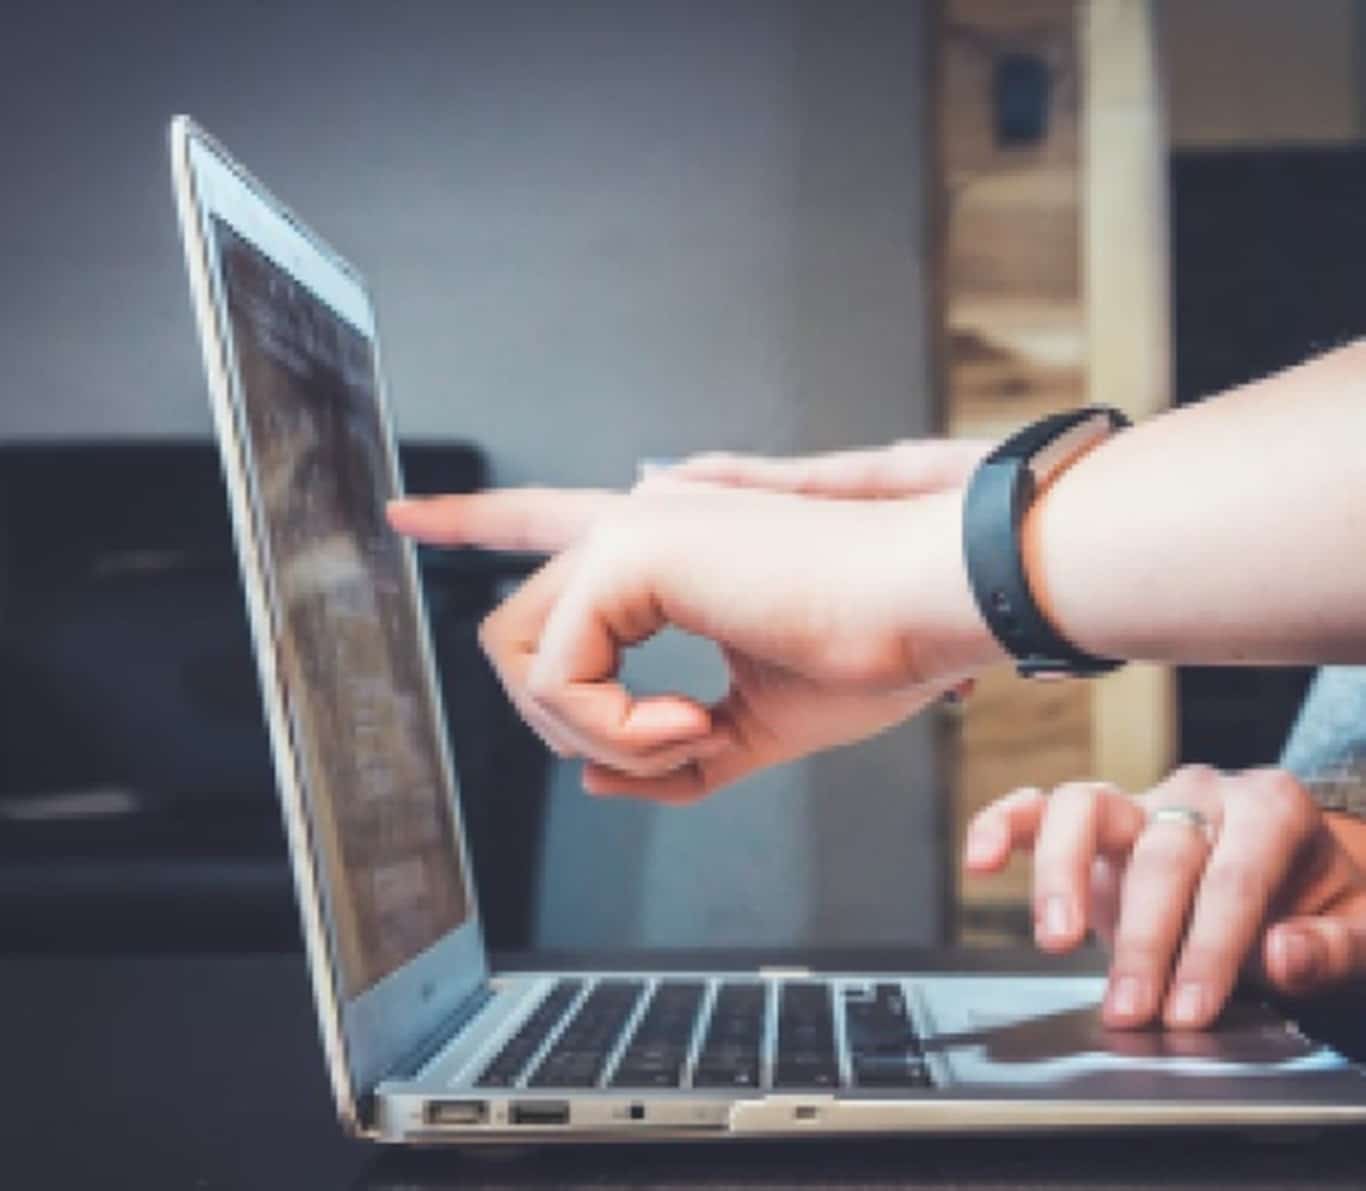 Finger pointing at laptop computer screen